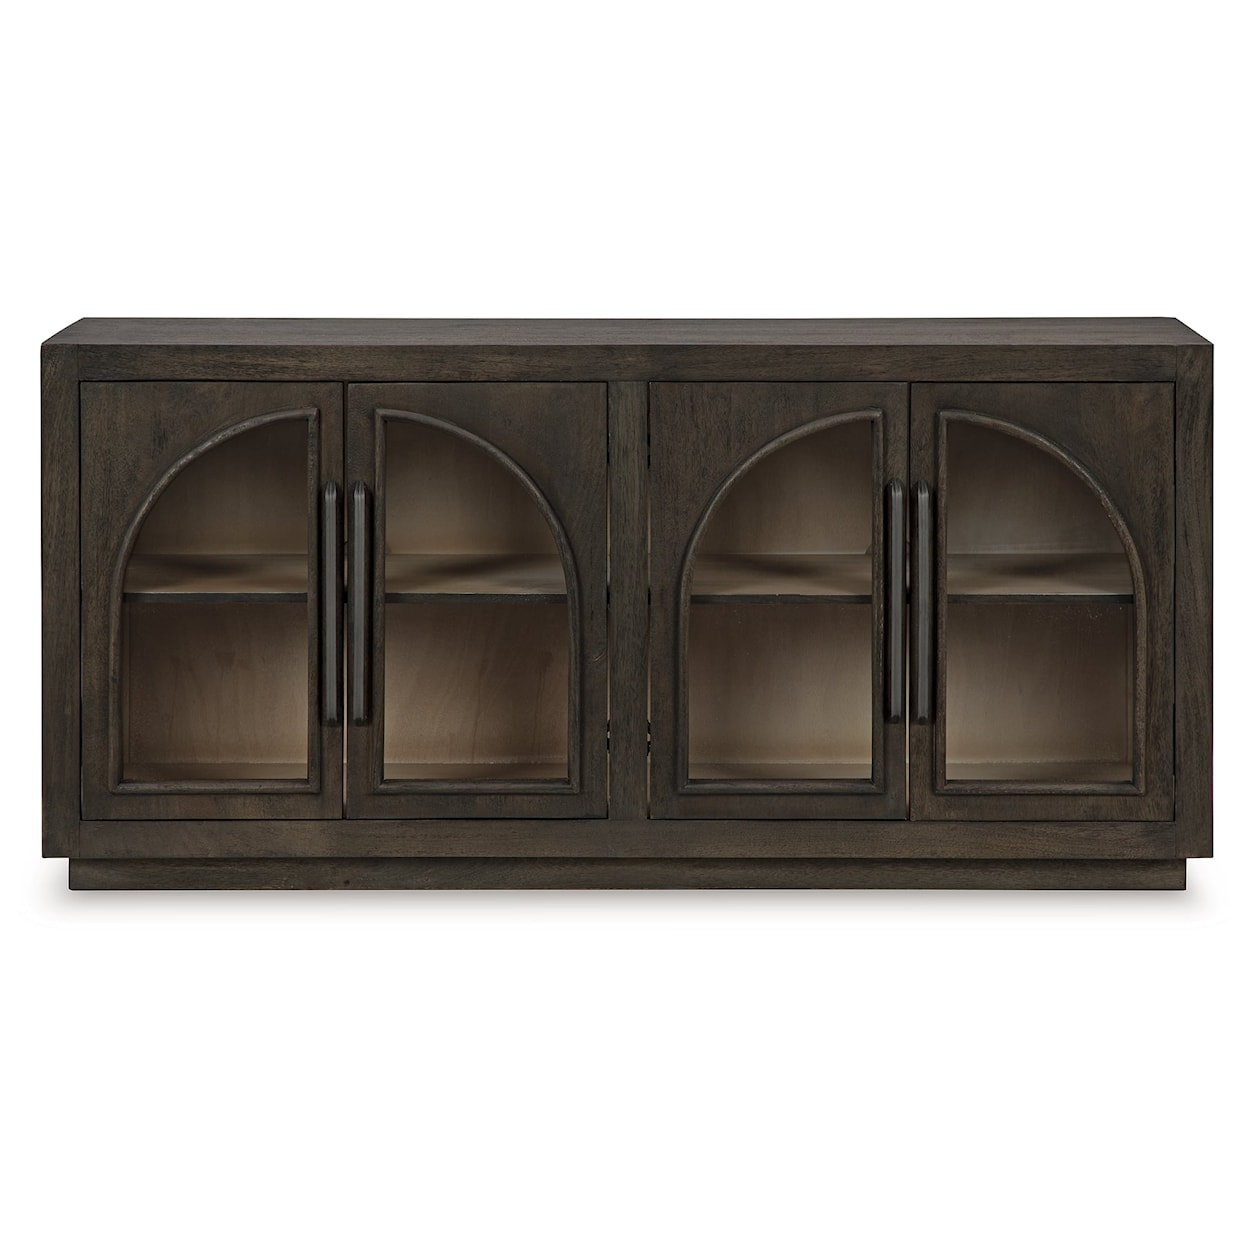 StyleLine Dreley Accent Cabinet